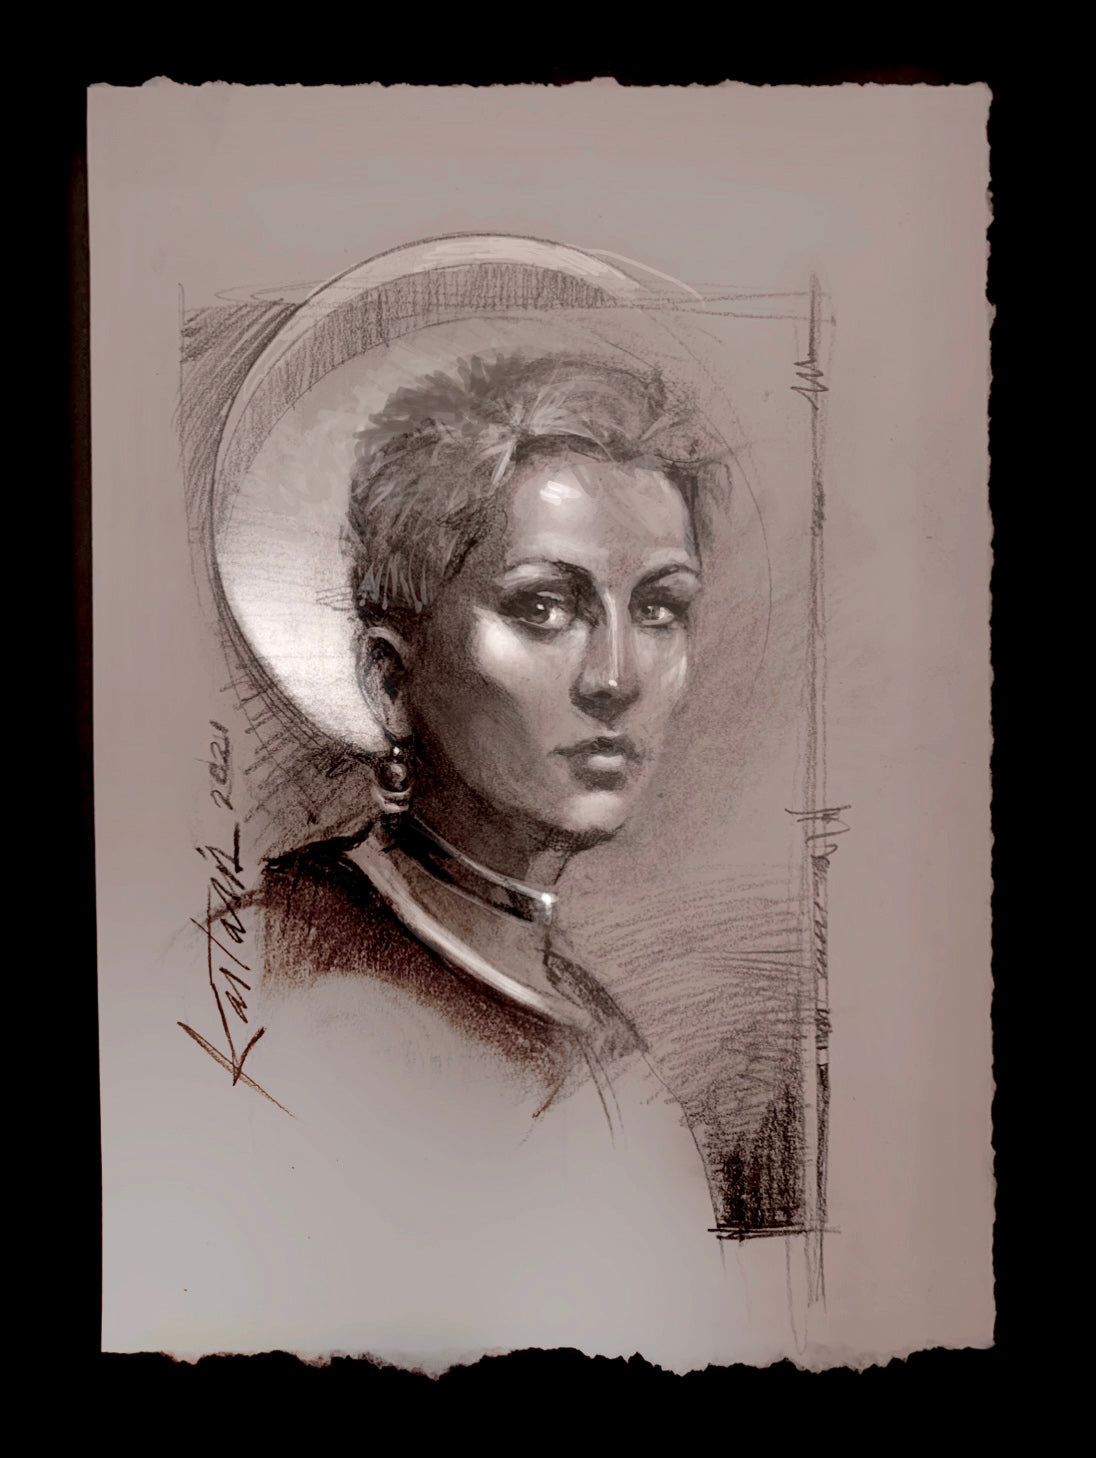 "Unresolved" is an original hand-drawn charcoal sketch from Rip Kastaris. It is the kind of Ala Prima drawing that Kastaris is known for. An original art investment has enduring value.